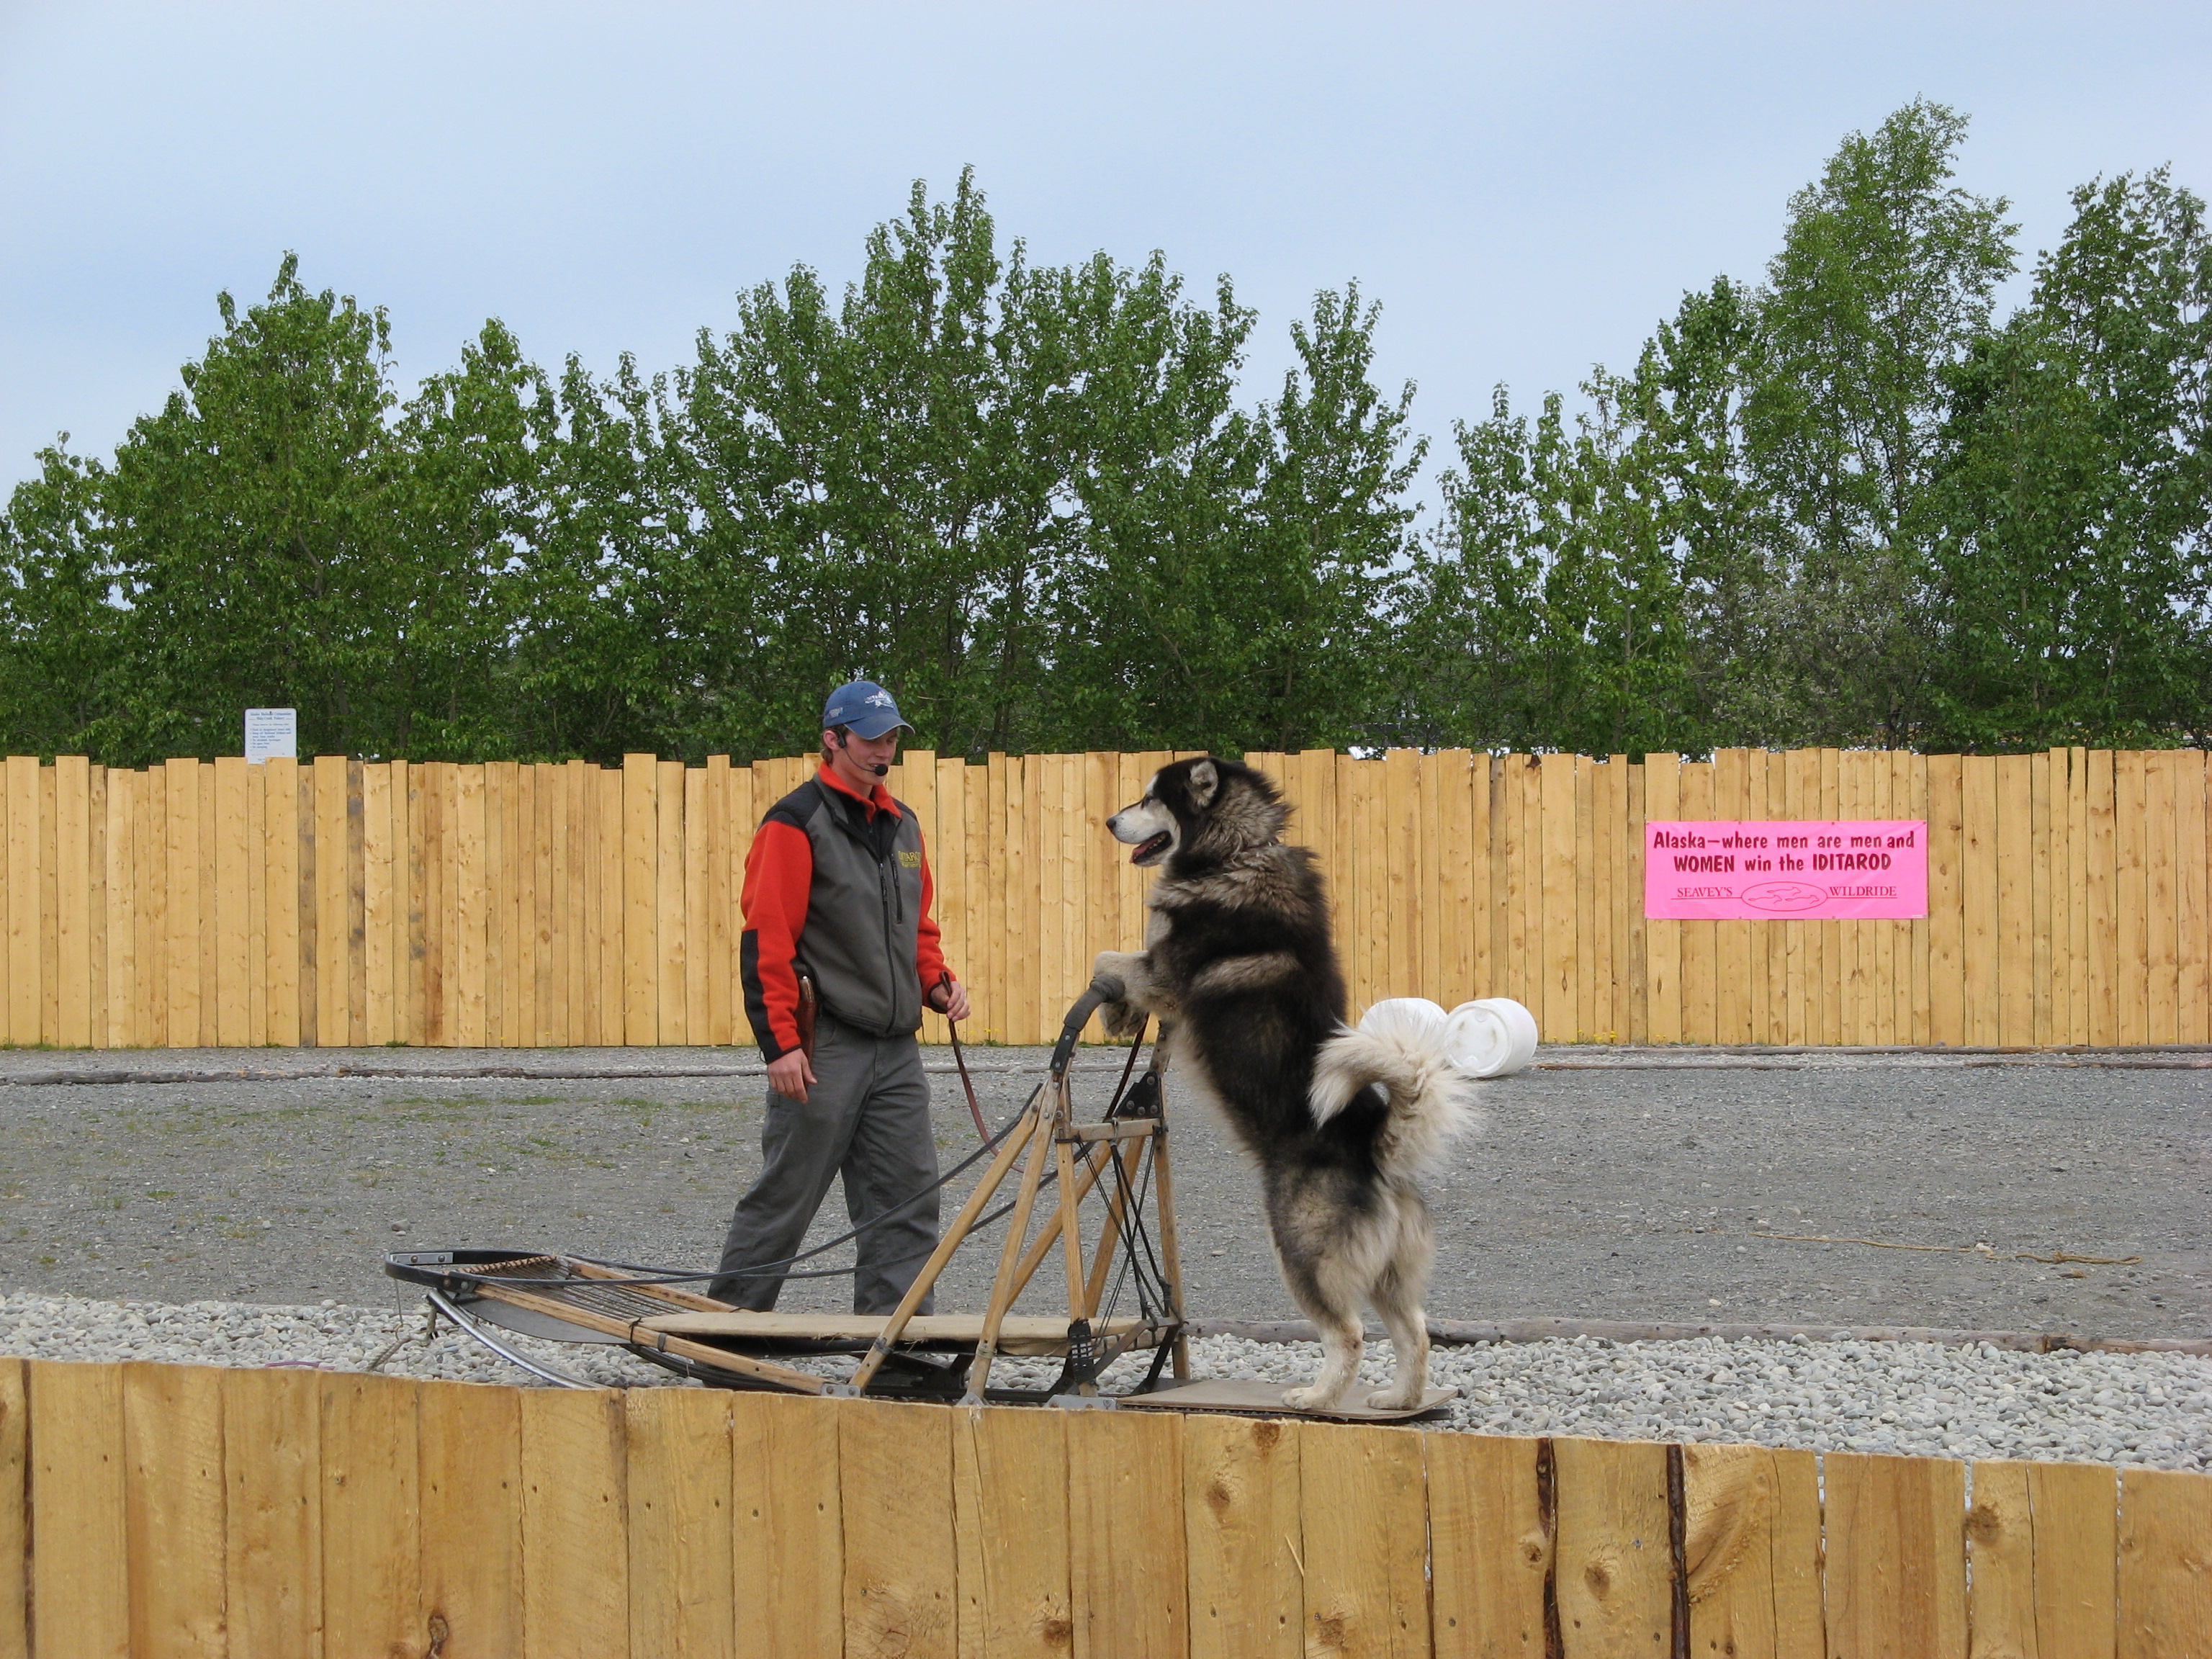 Seavey sled dog show in Anchorage, Photo 1.